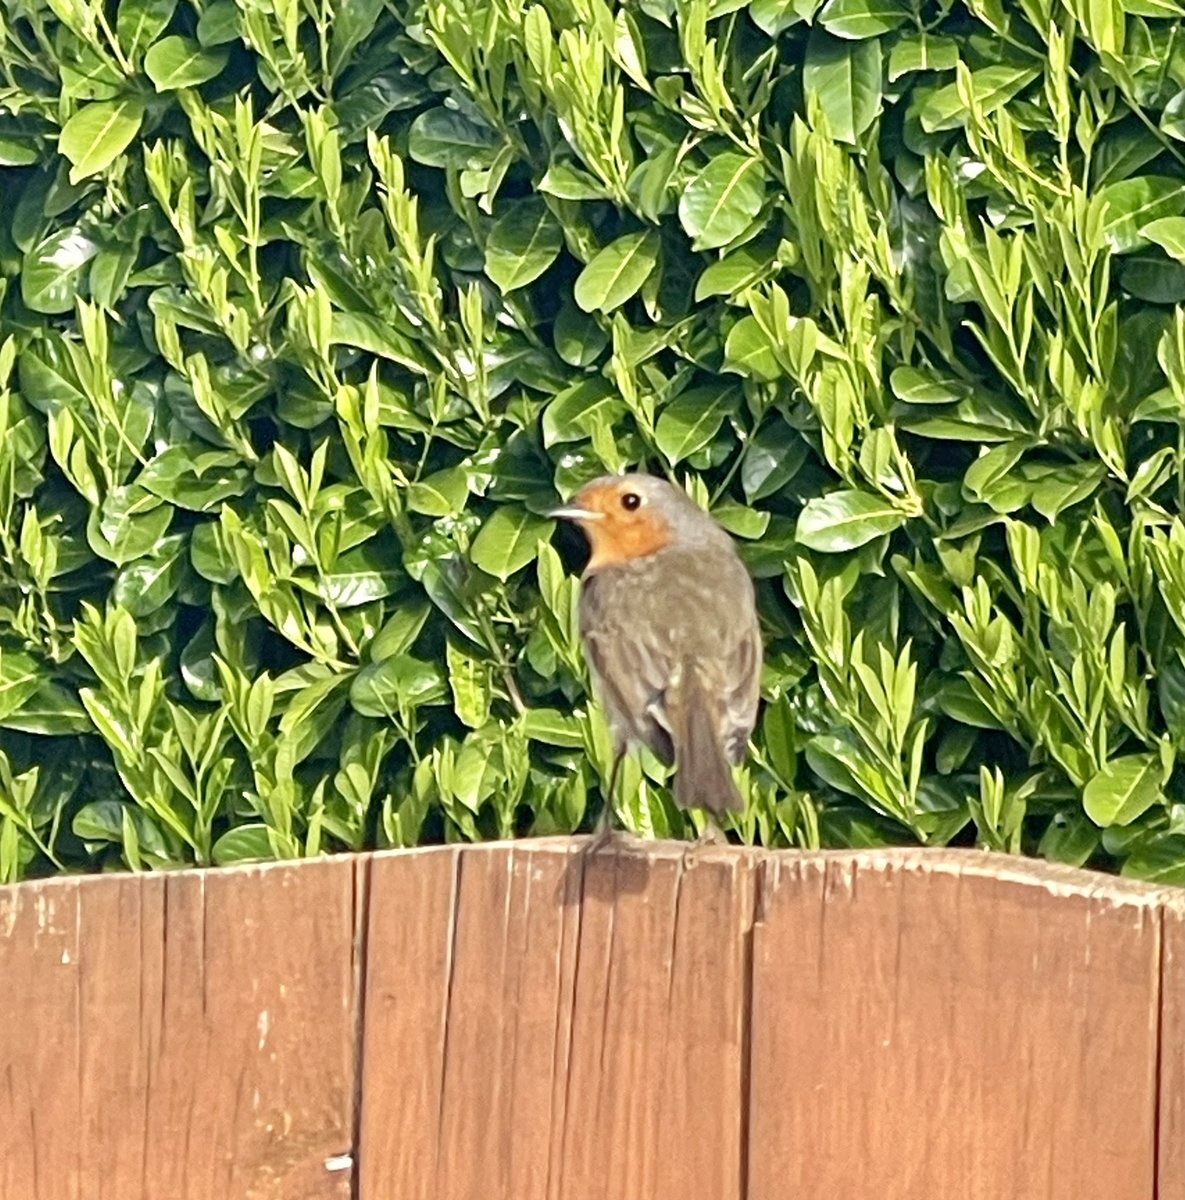 The Robin had returned from my first walk with Fritz. This is as near as I could get this morning but it’s friendly. Happy Sunday. #Sunday #SundayMorning #Robin #MorningVisitor